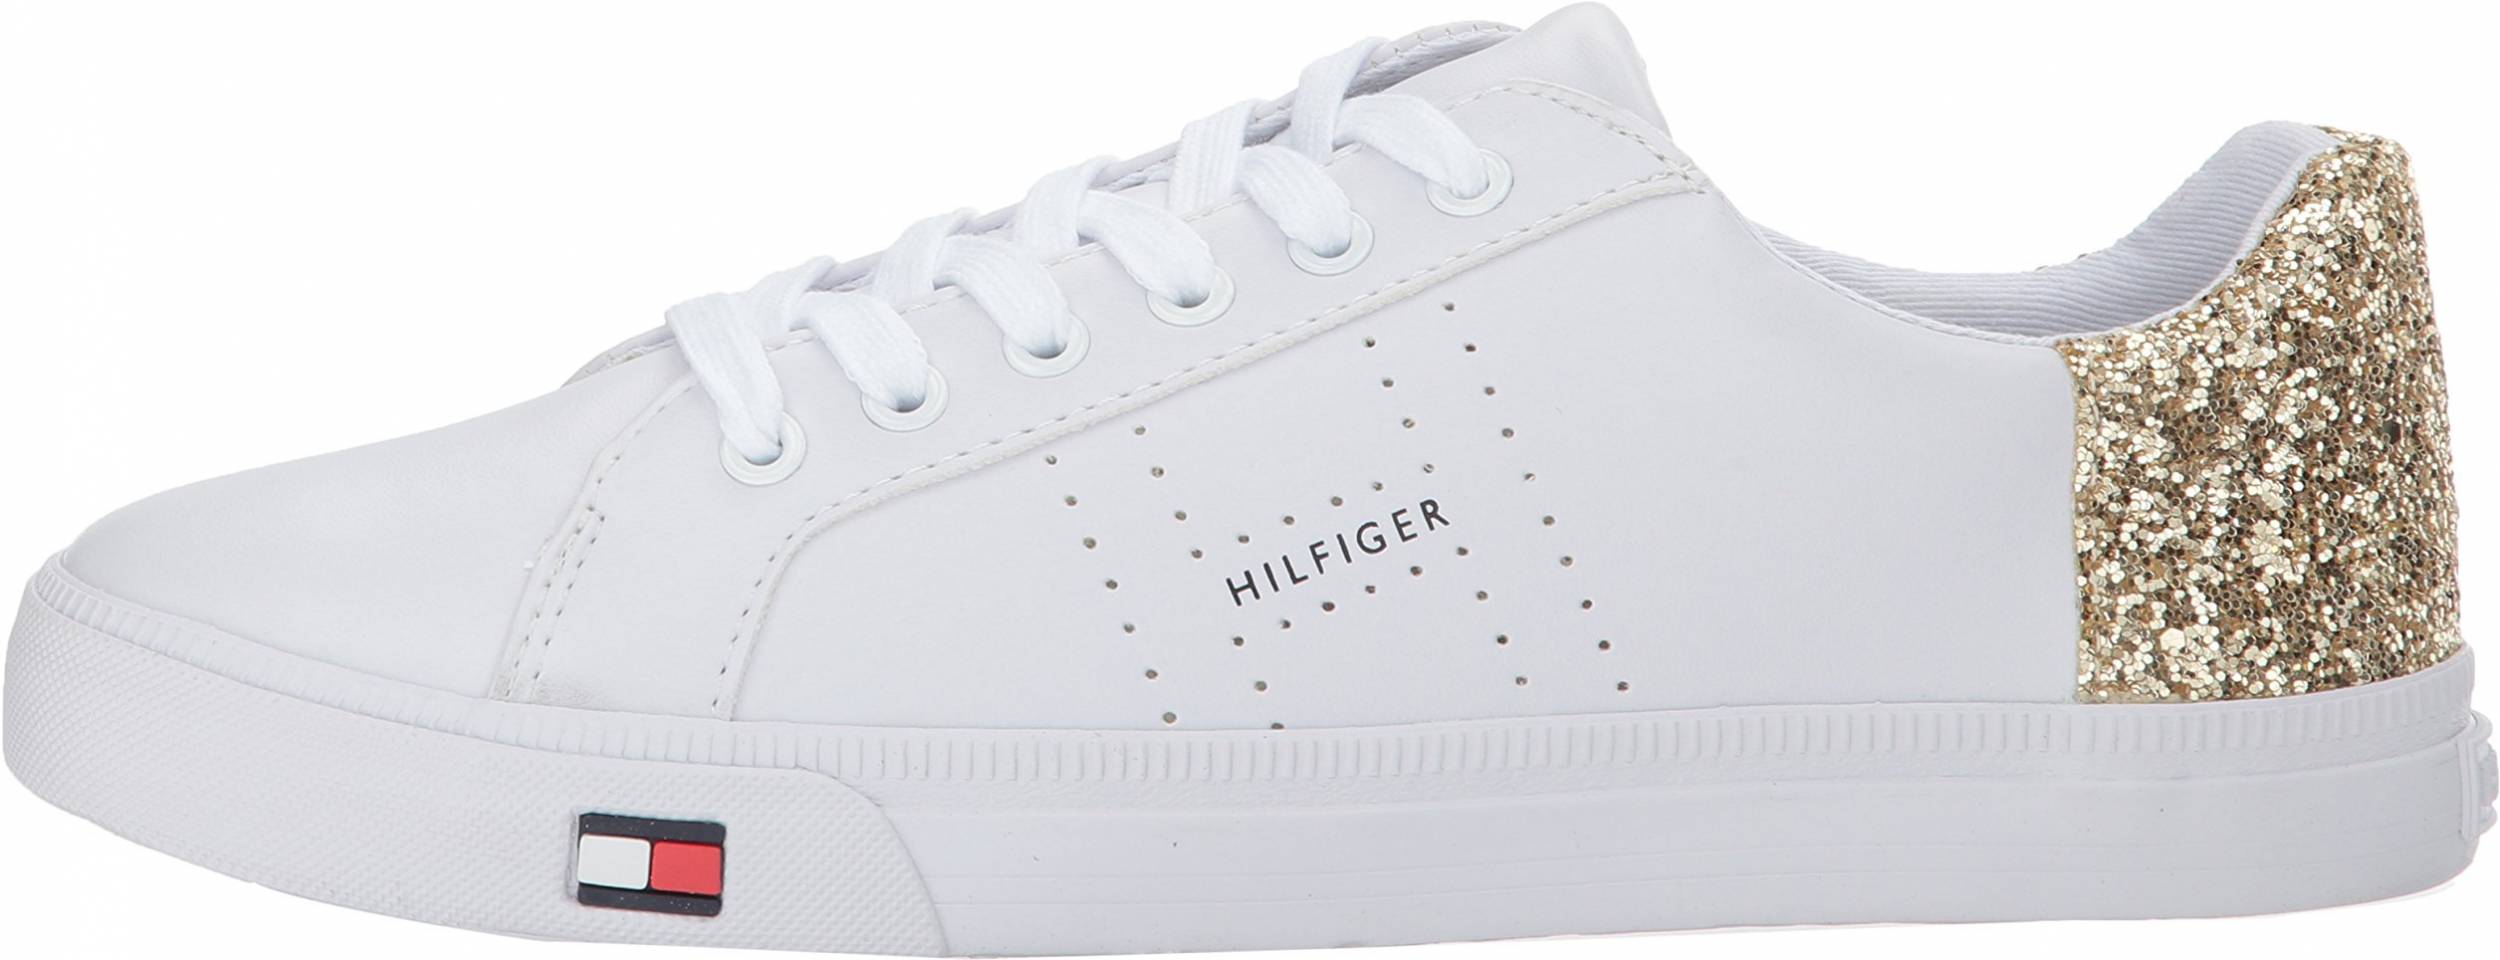 tommy hilfiger shoes womens sneakers